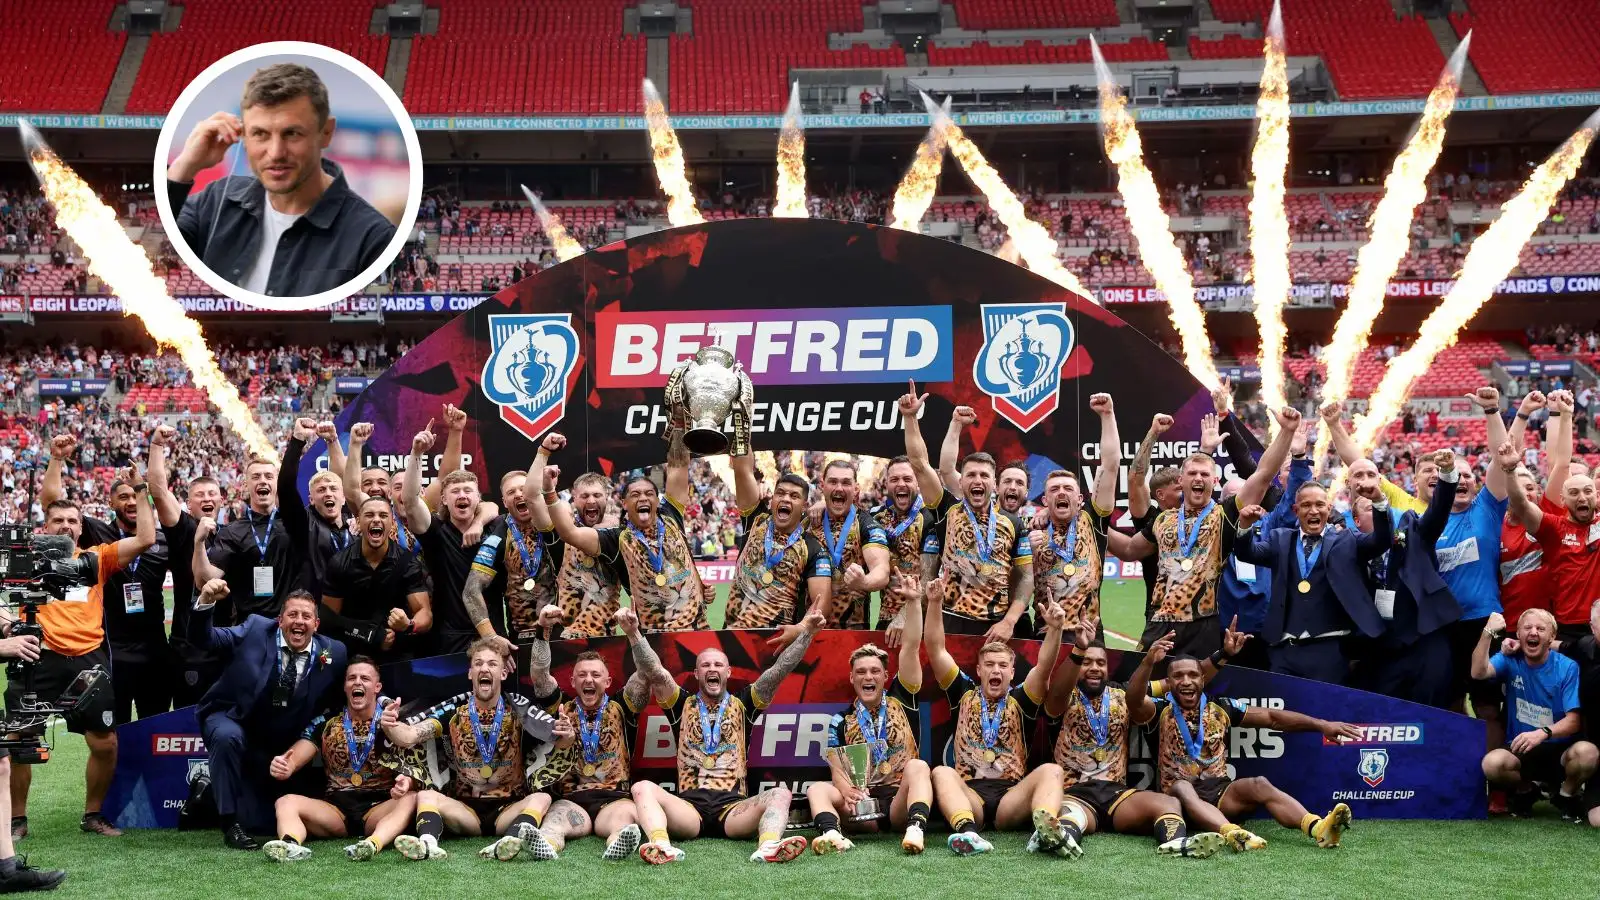 Leigh Leopards ‘incredible’ Challenge Cup victory ‘equally as impressive’ as Leicester City’s Premier League heroics, says Jon Wilkin